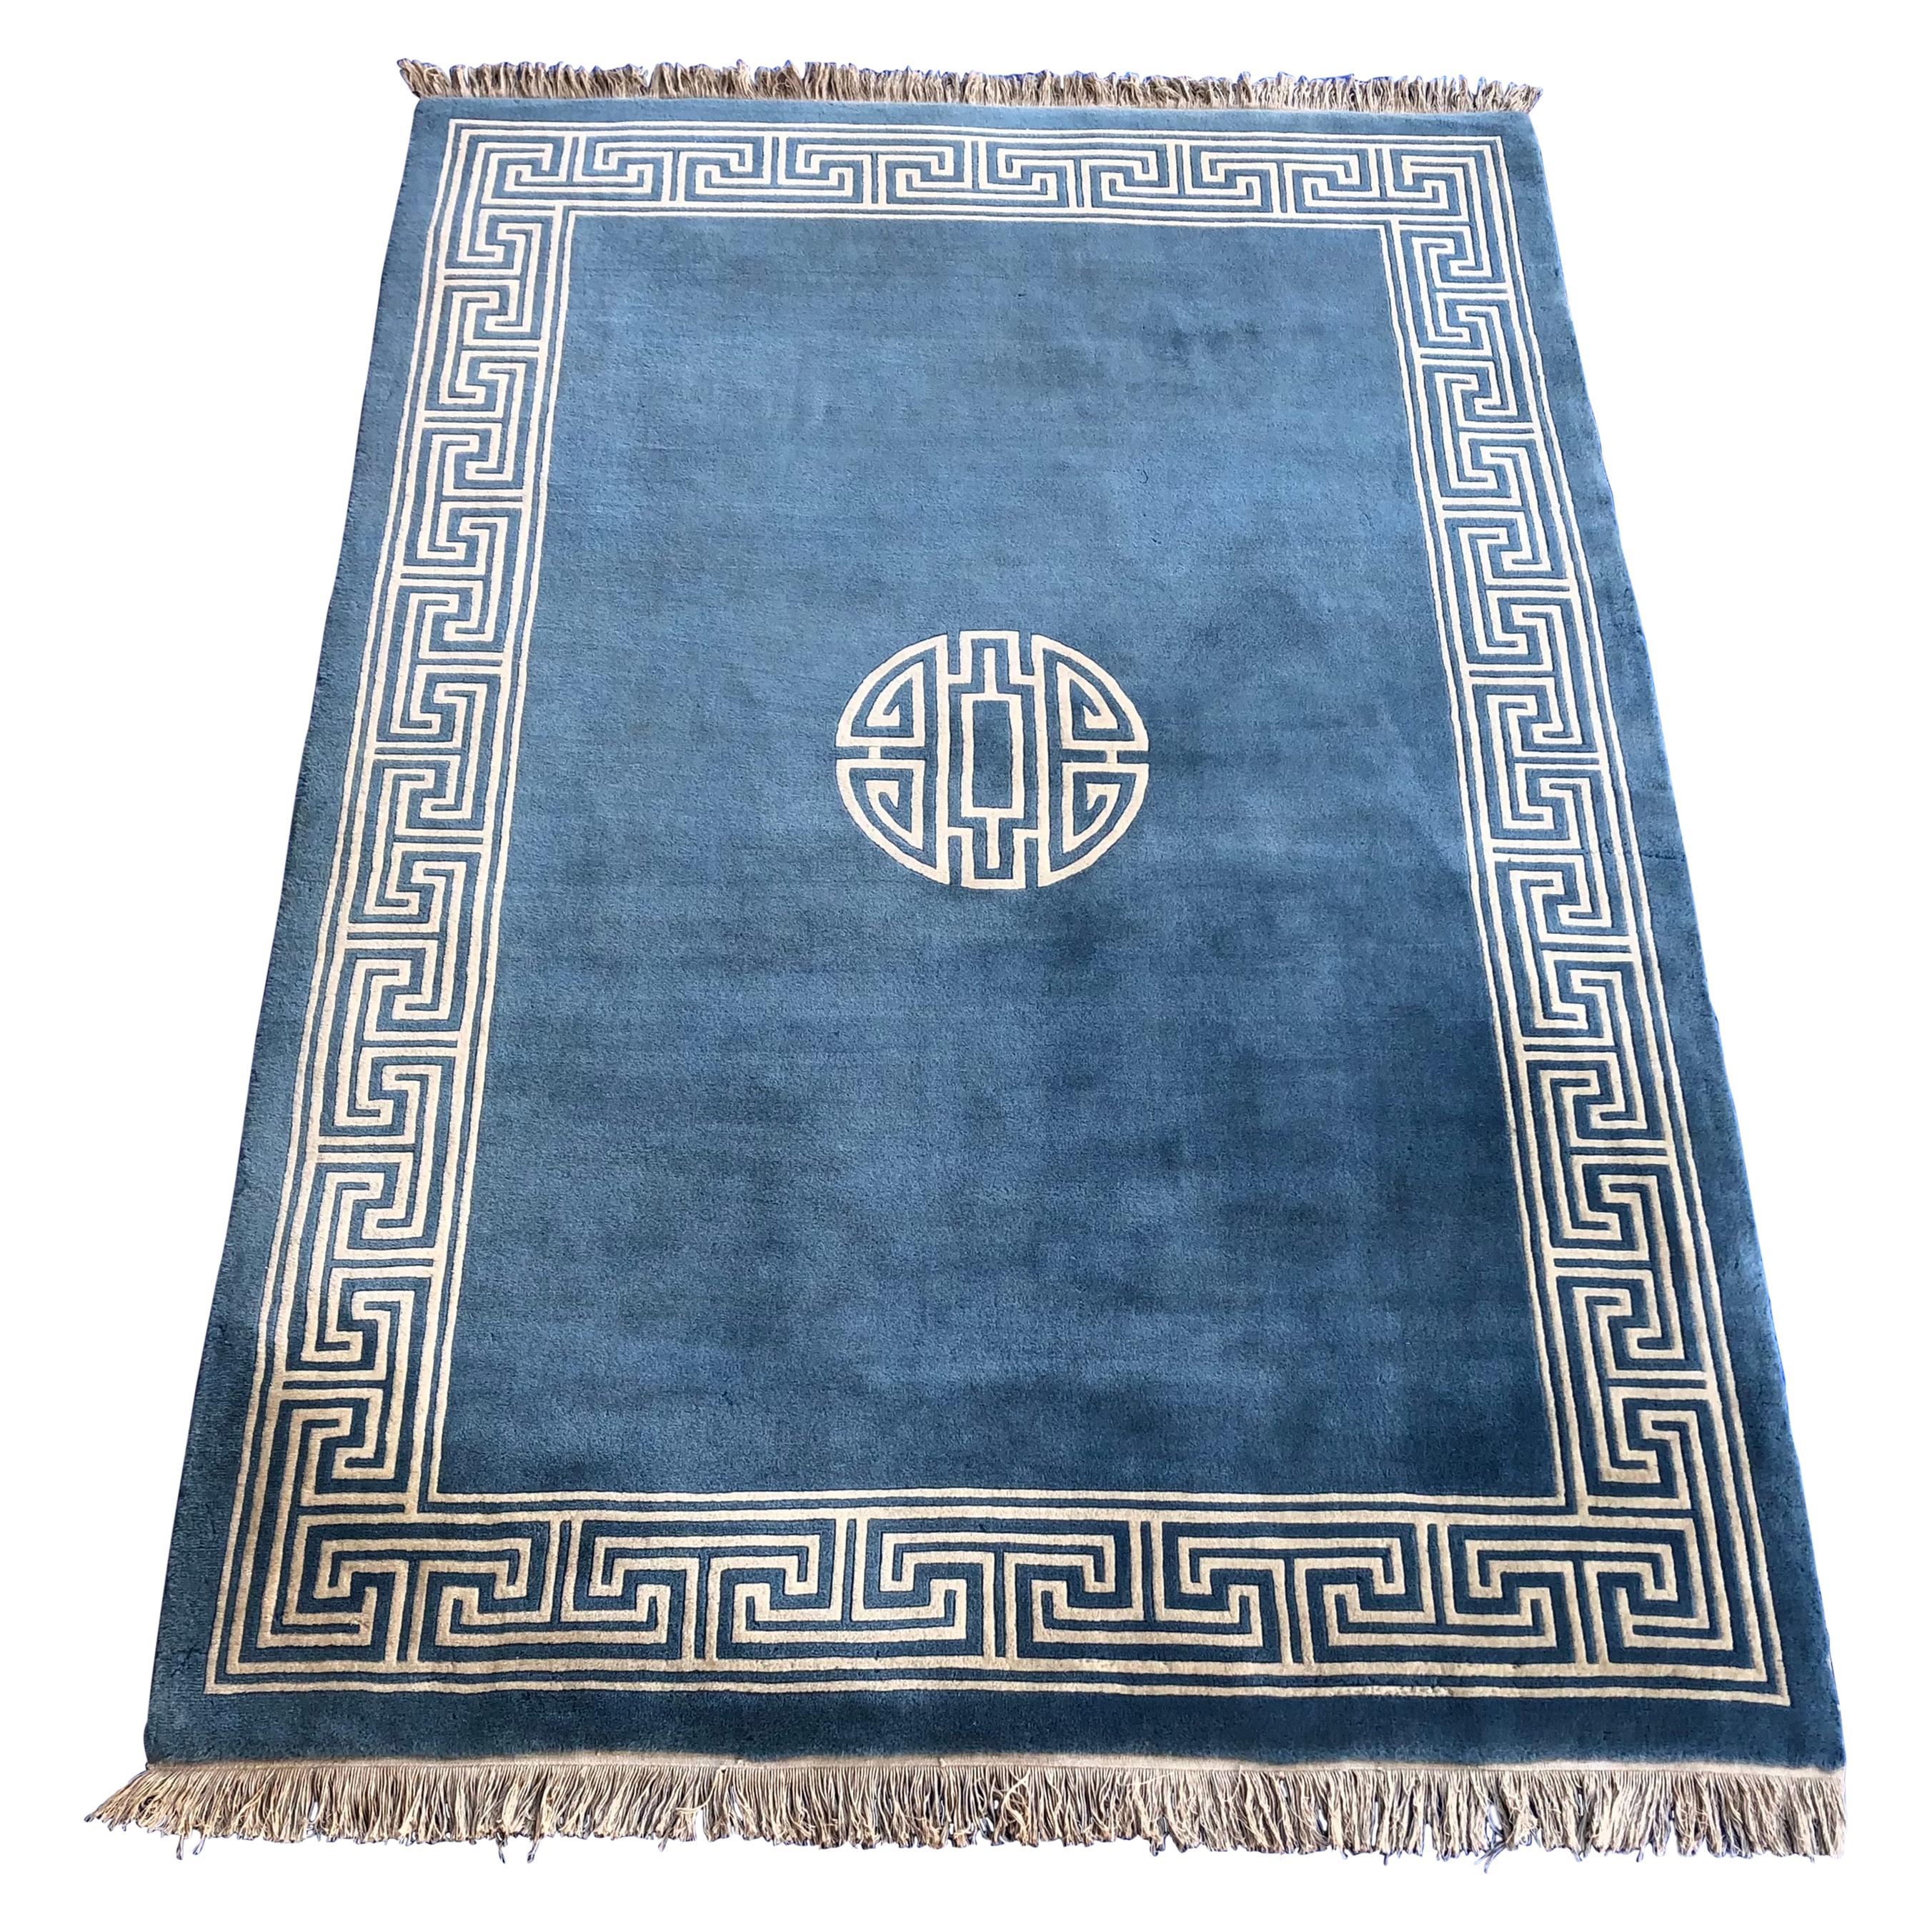 Stunning Blue and Beige Antique Collectible Ningxia or Ningshia Silk Area Rug For Sale